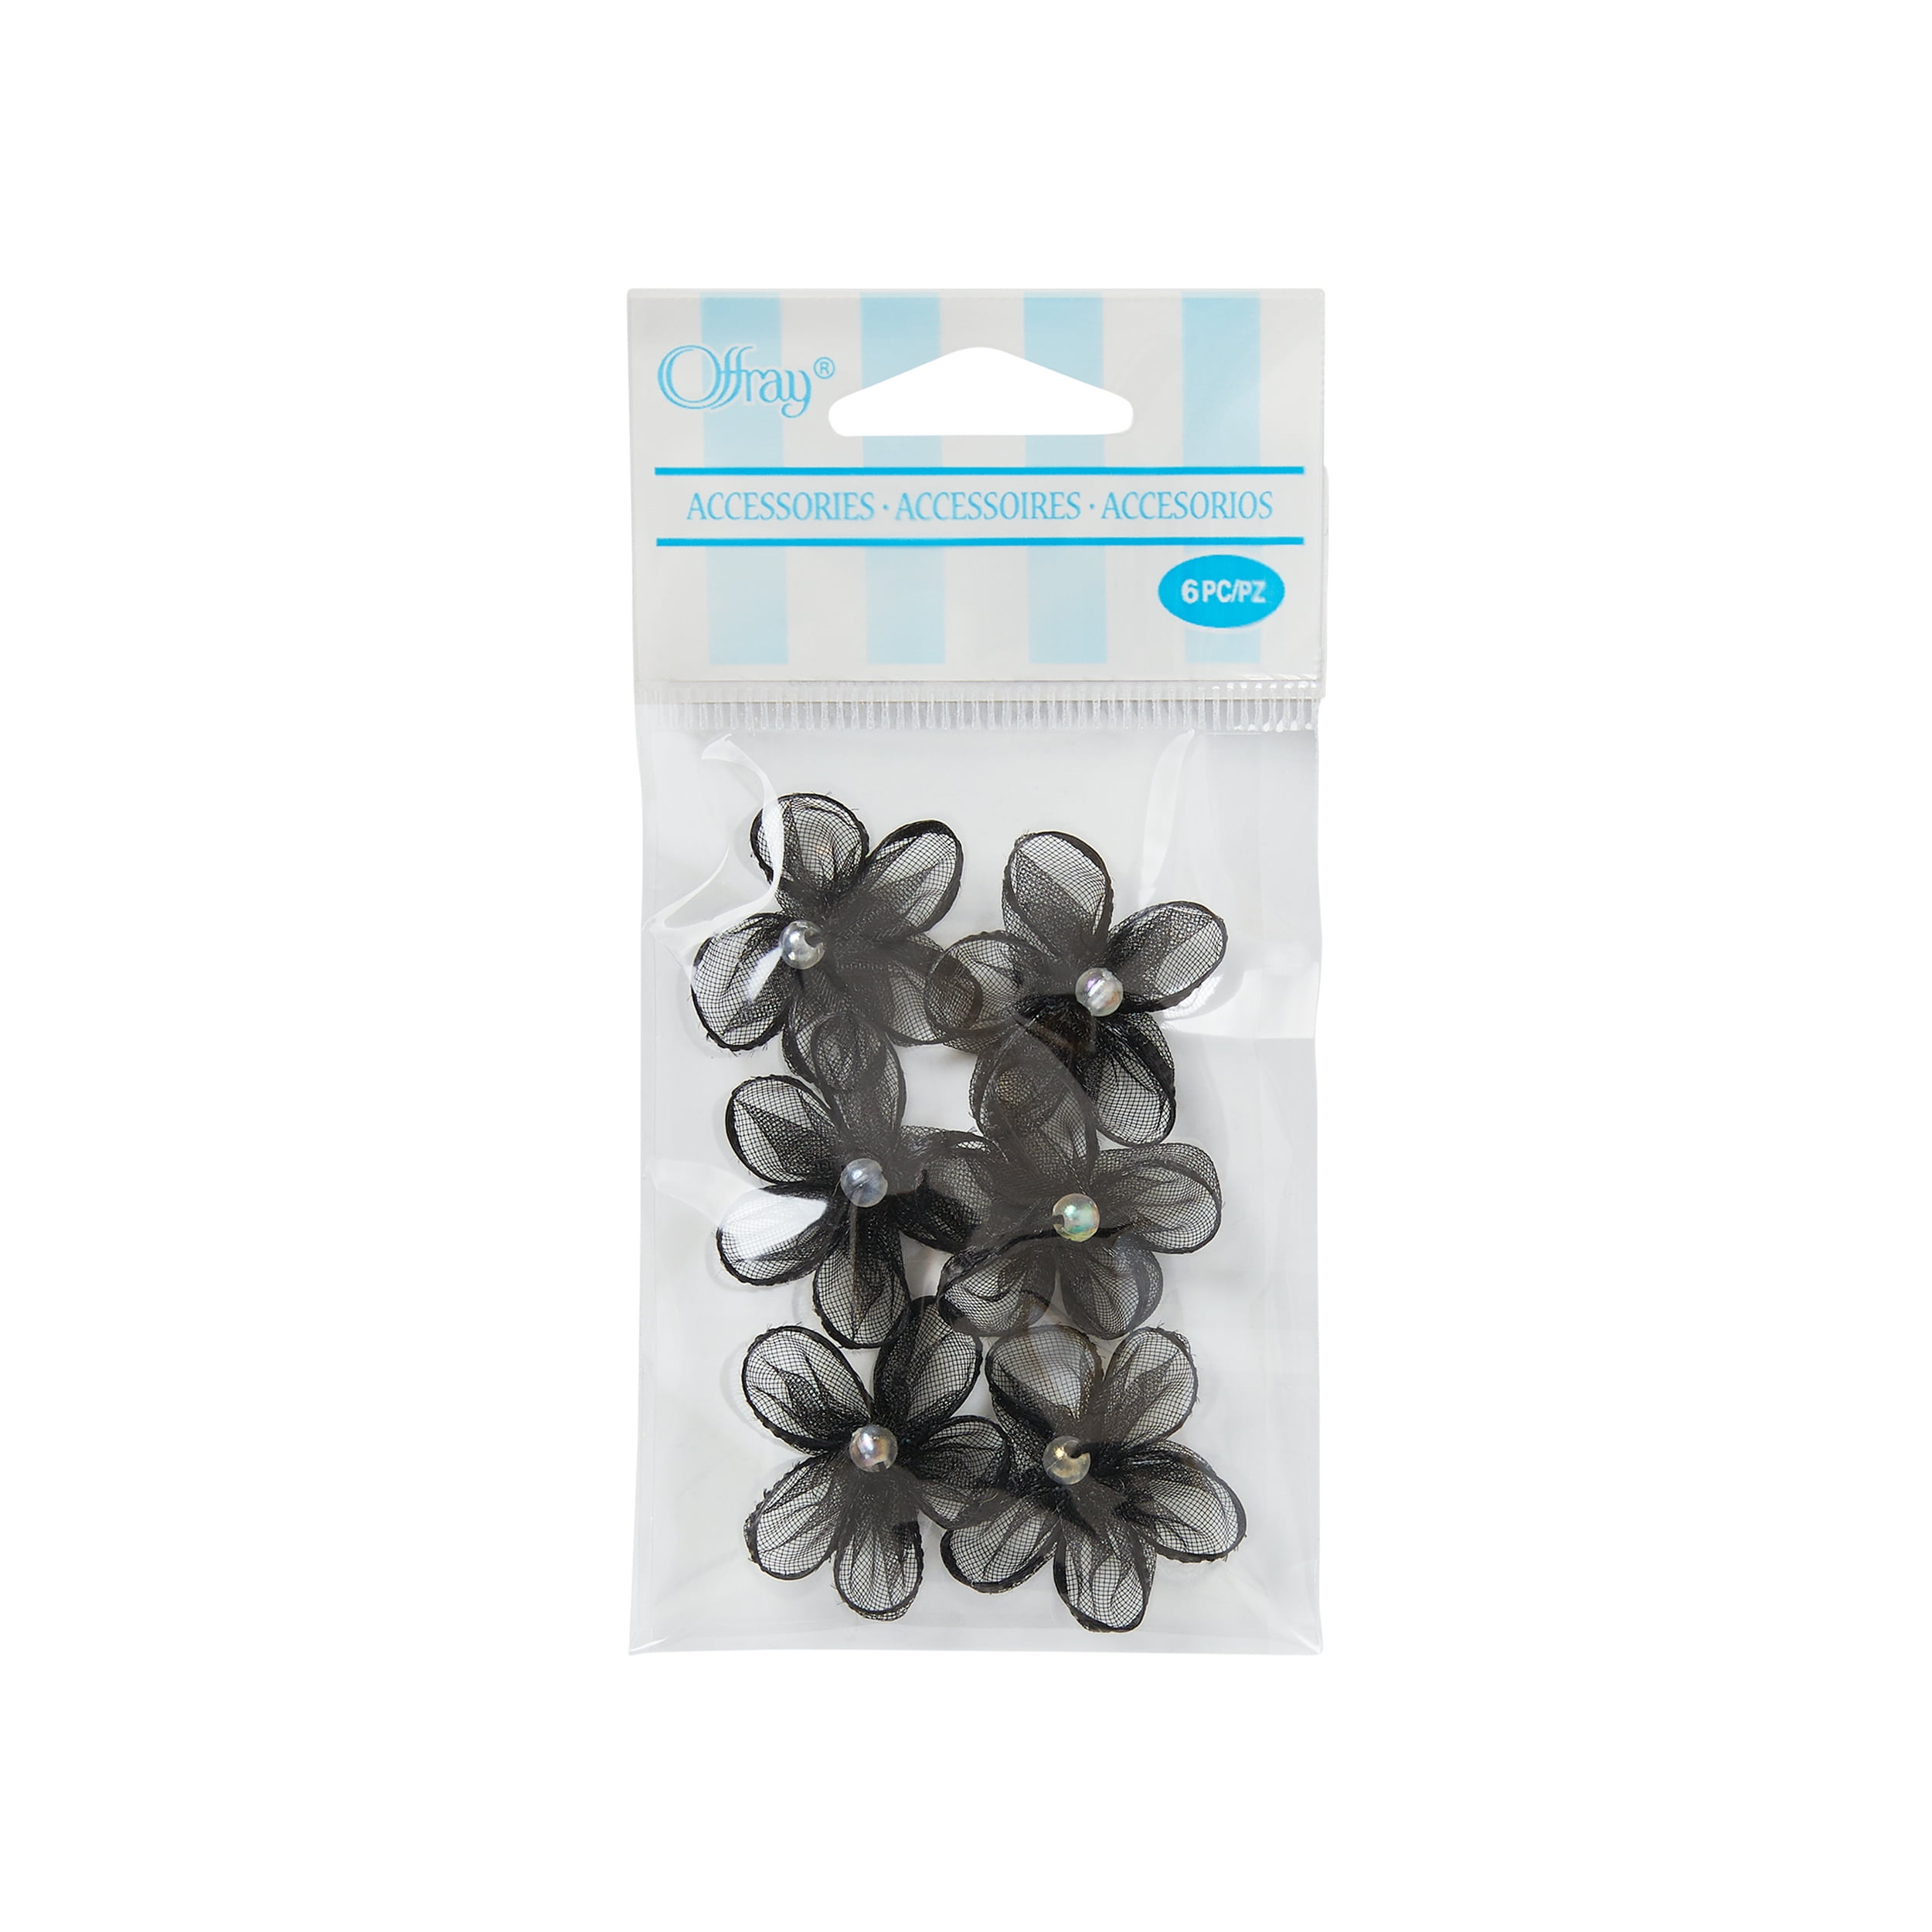 Offray Accessories, Black 3/4 inch 5 Petal Sheer Flower with Pearl Accessory for Wedding, Hair Clips, and Scrapbooking, 6 count, 1 Package